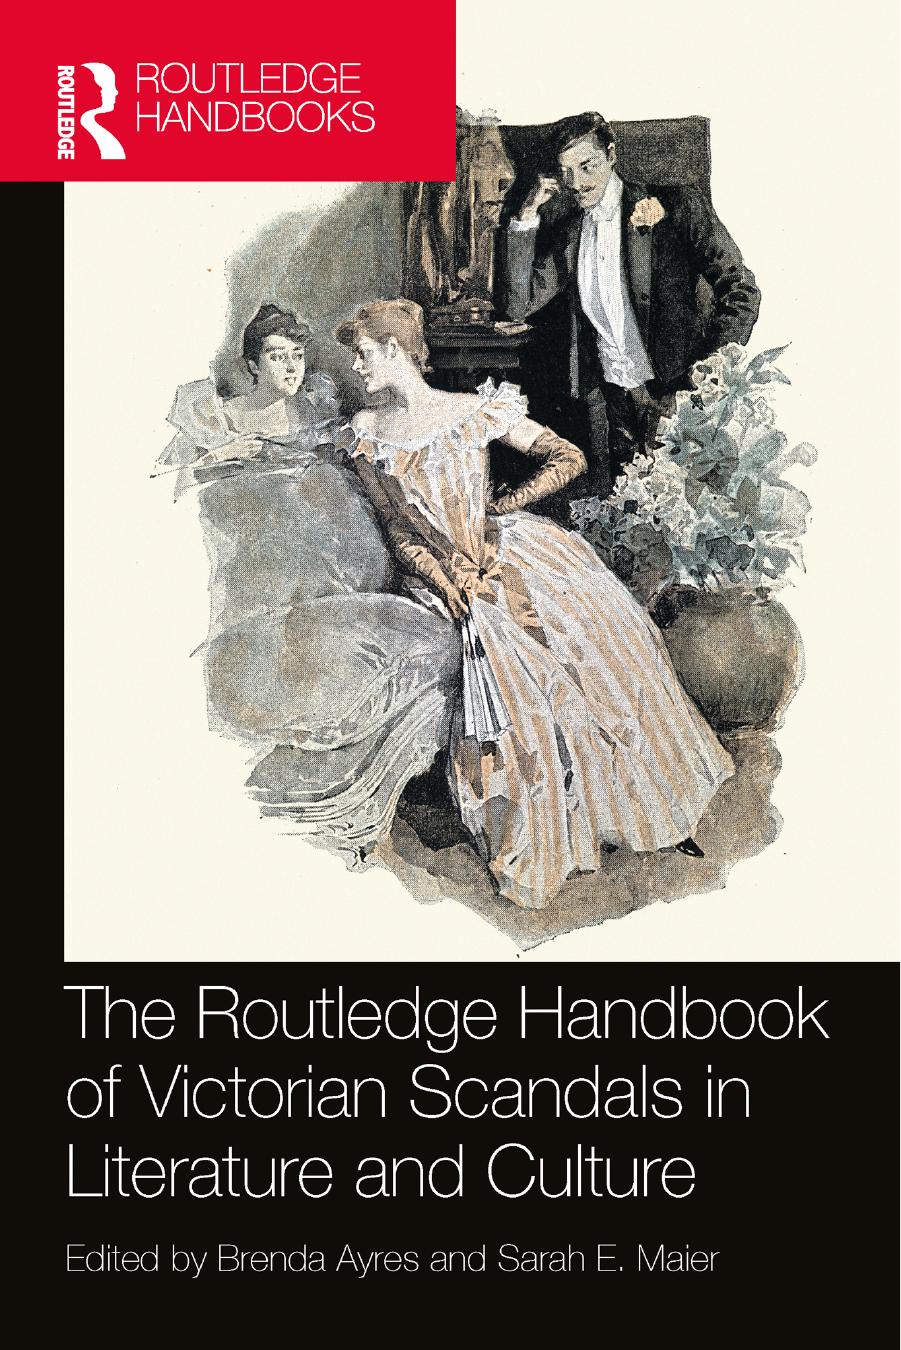 The Routledge Handbook of Victorian Scandals in Literature and Culture by Edited by Brenda Ayres and Sarah E. Maier